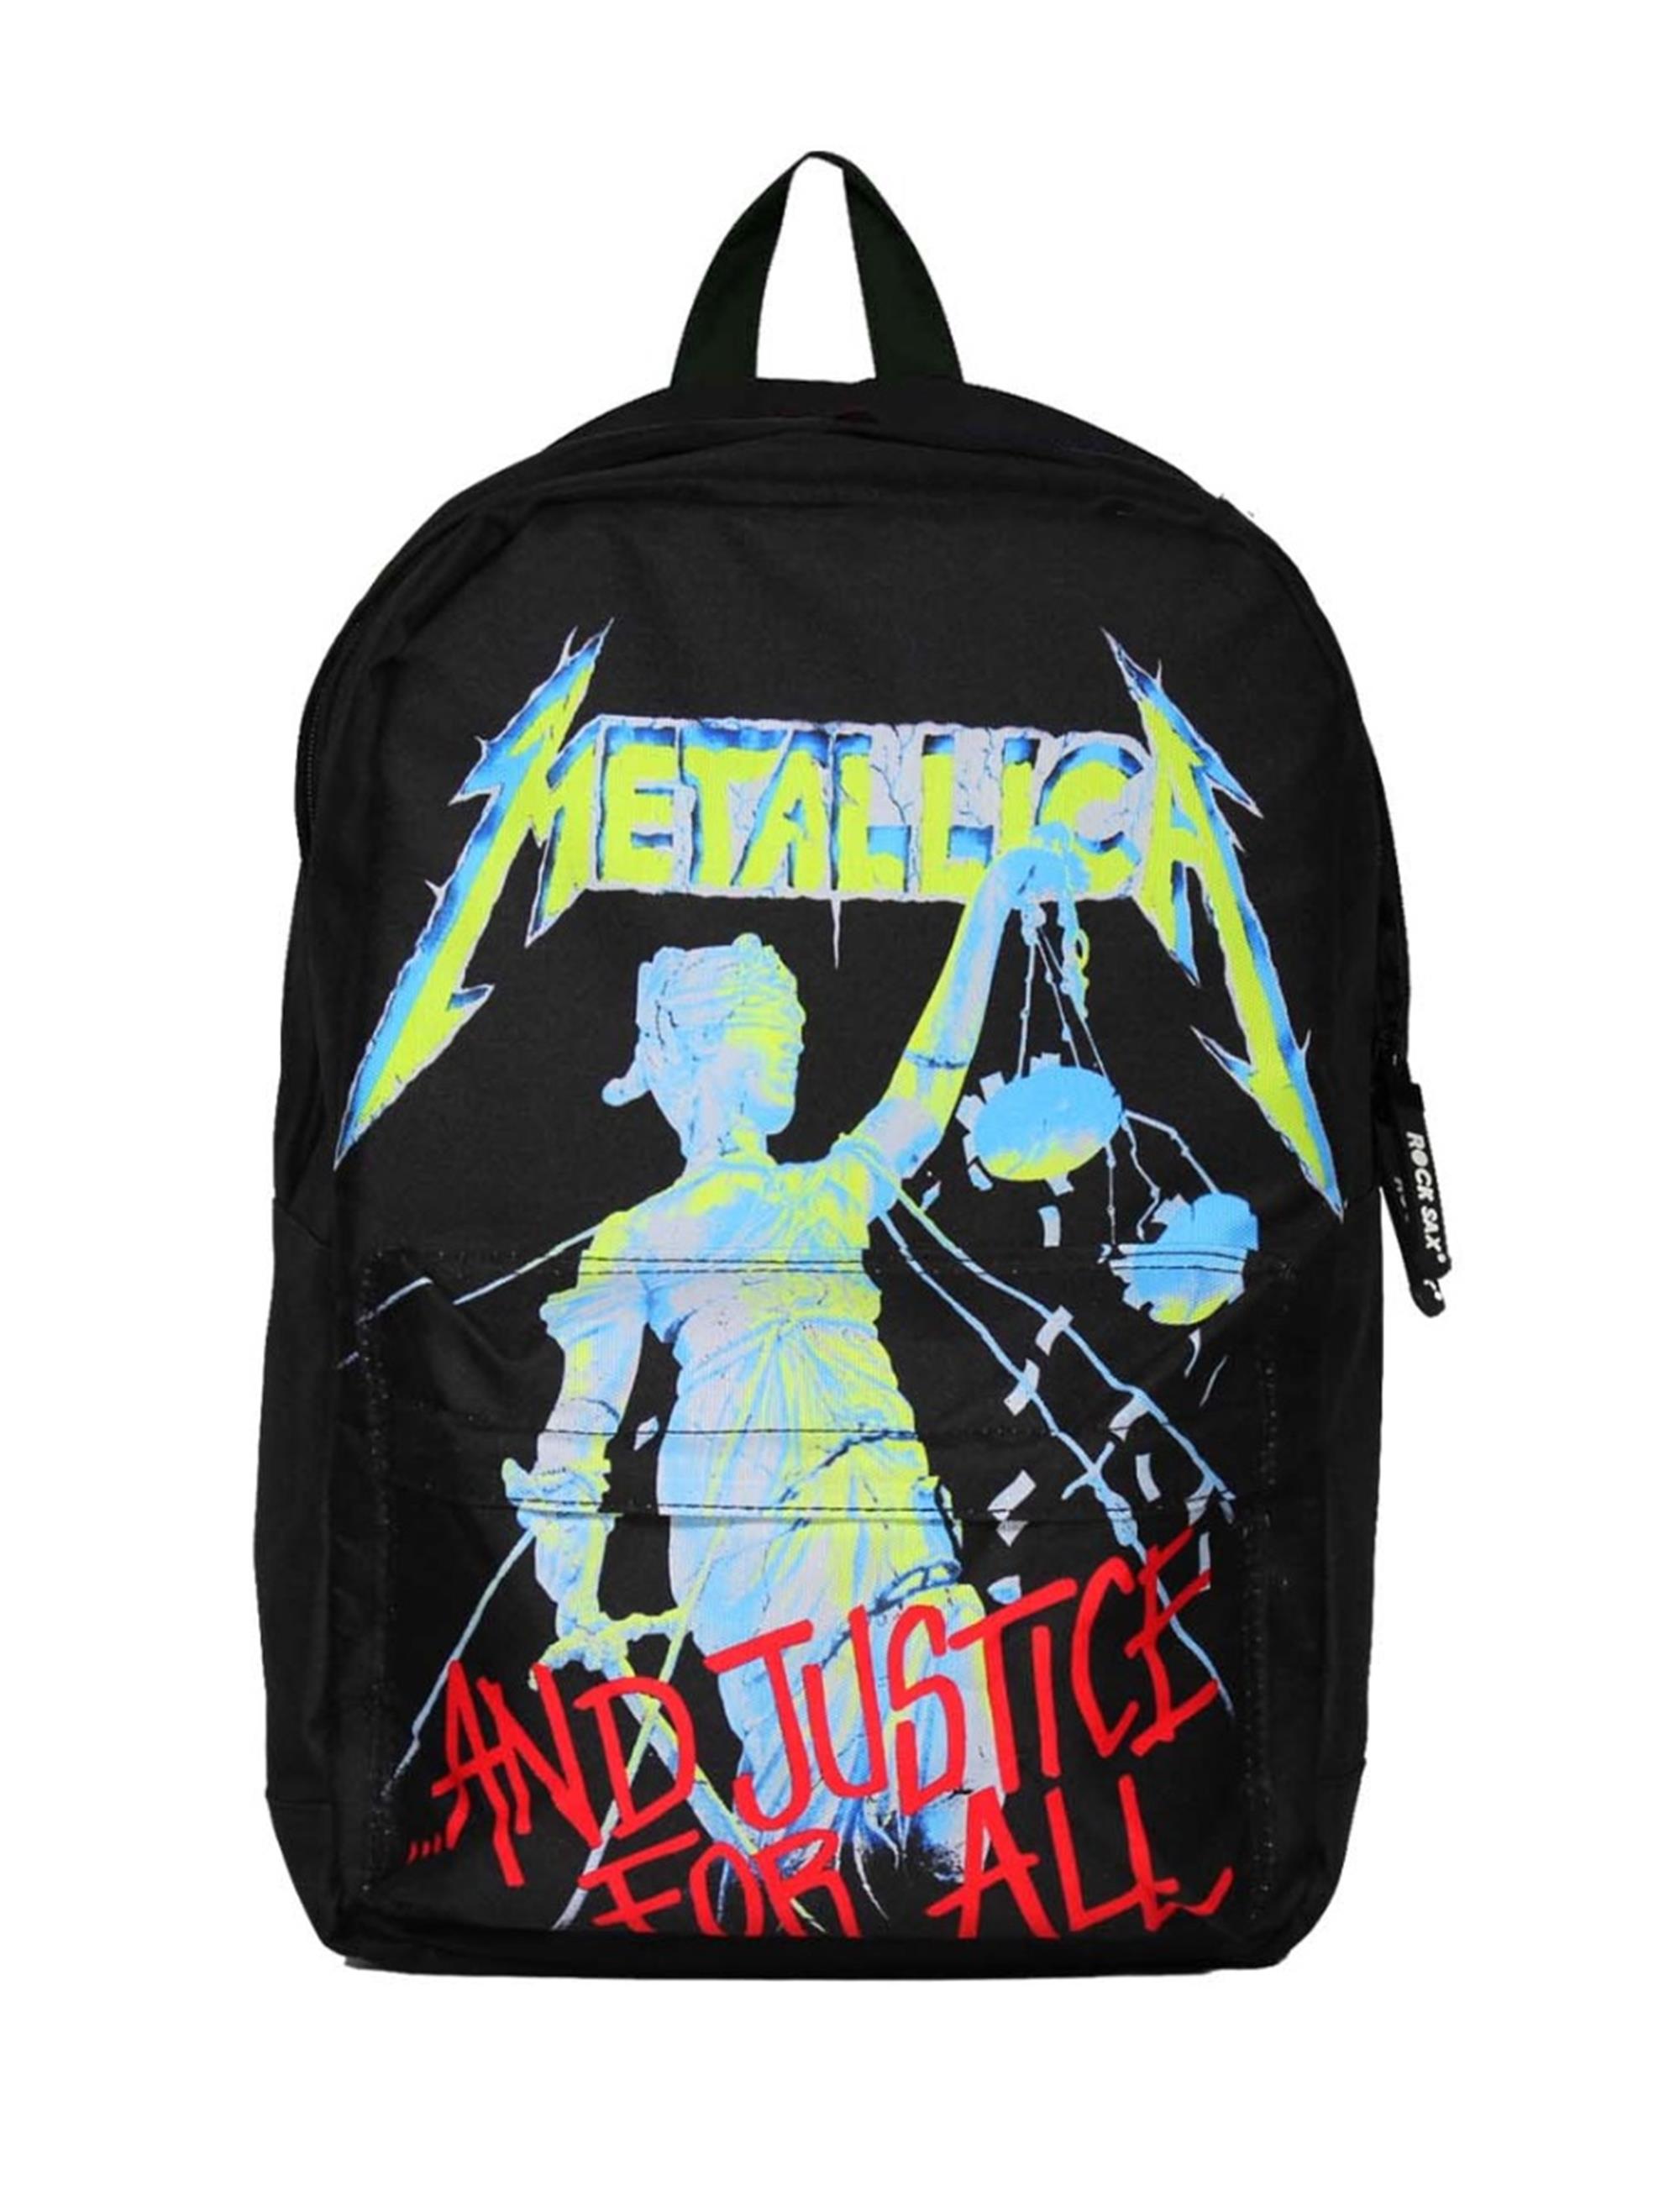 Metallica And Justice for All Classic Backpack